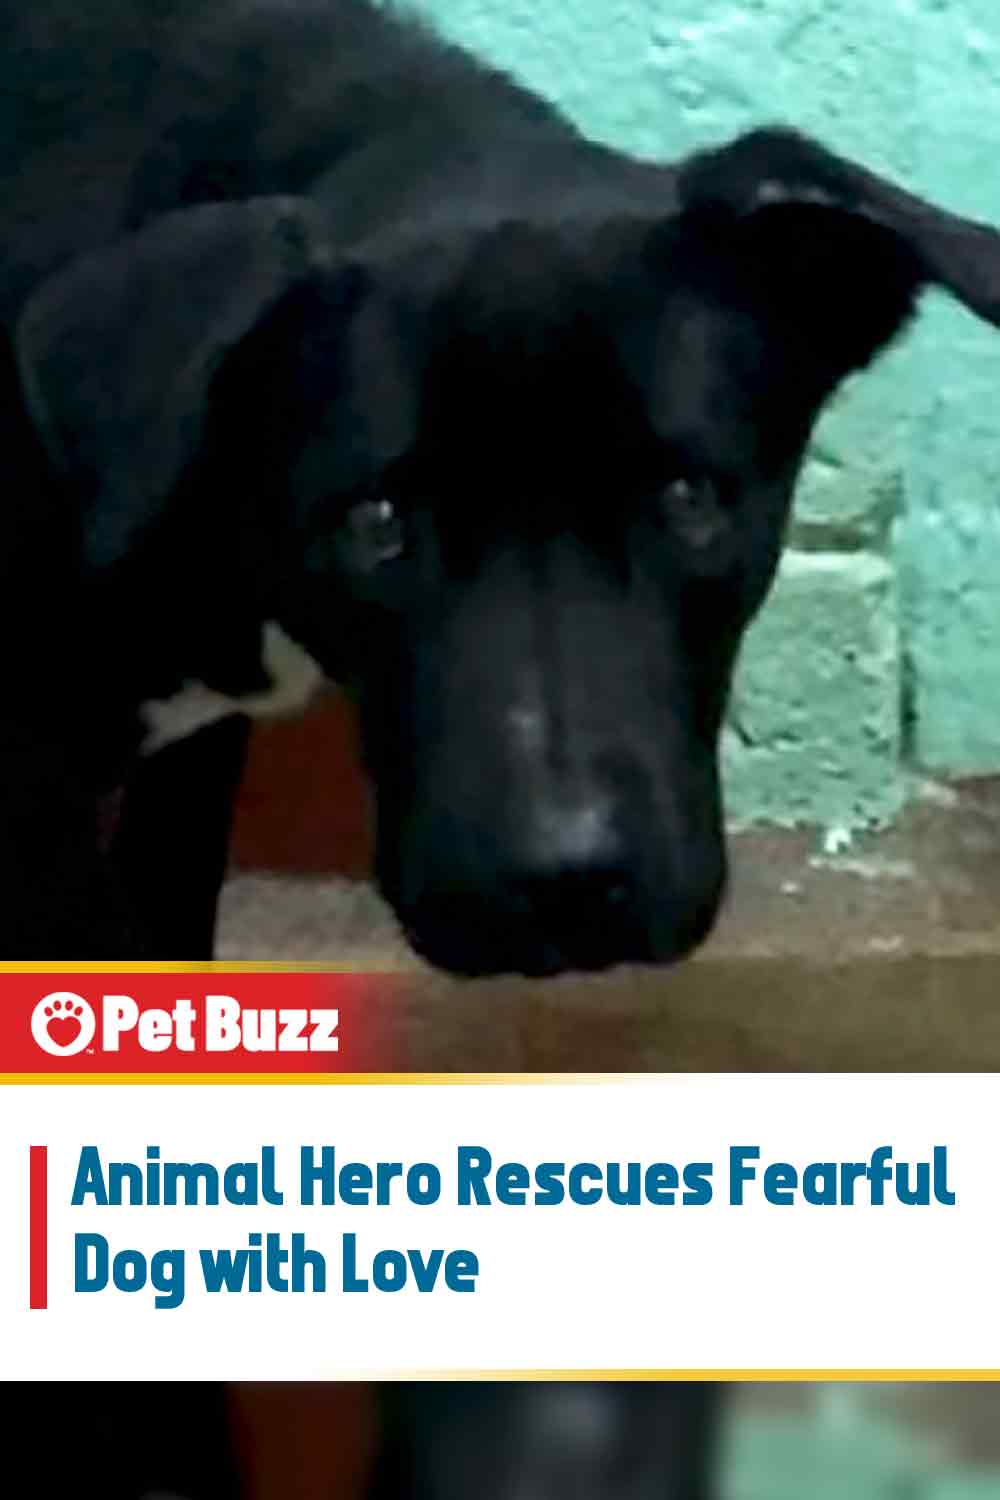 Animal Hero Rescues Fearful Dog with Love